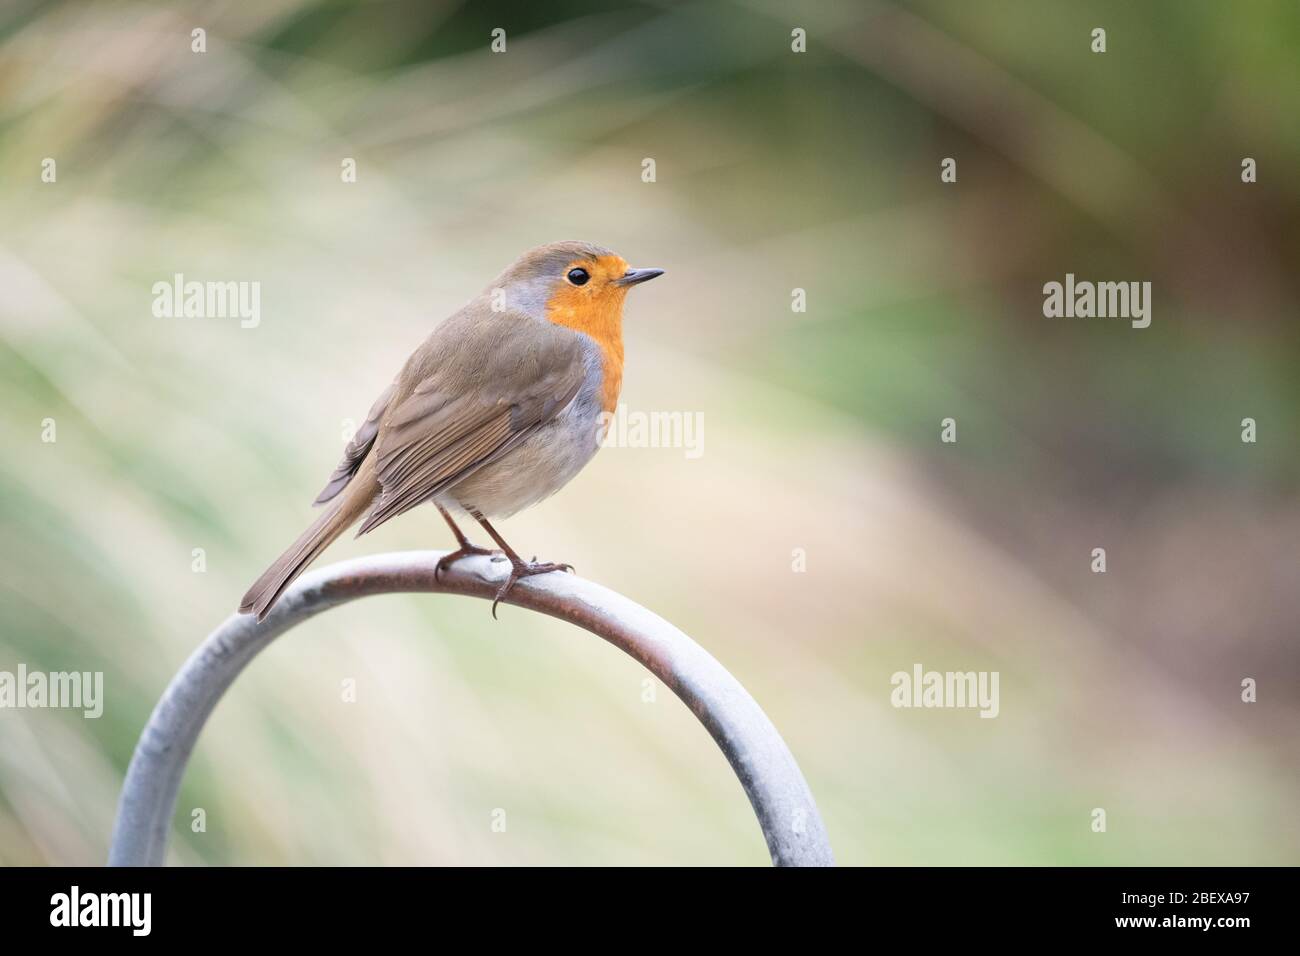 Robin - erithacus rubecula - perching on old metal watering can handle - UK Stock Photo